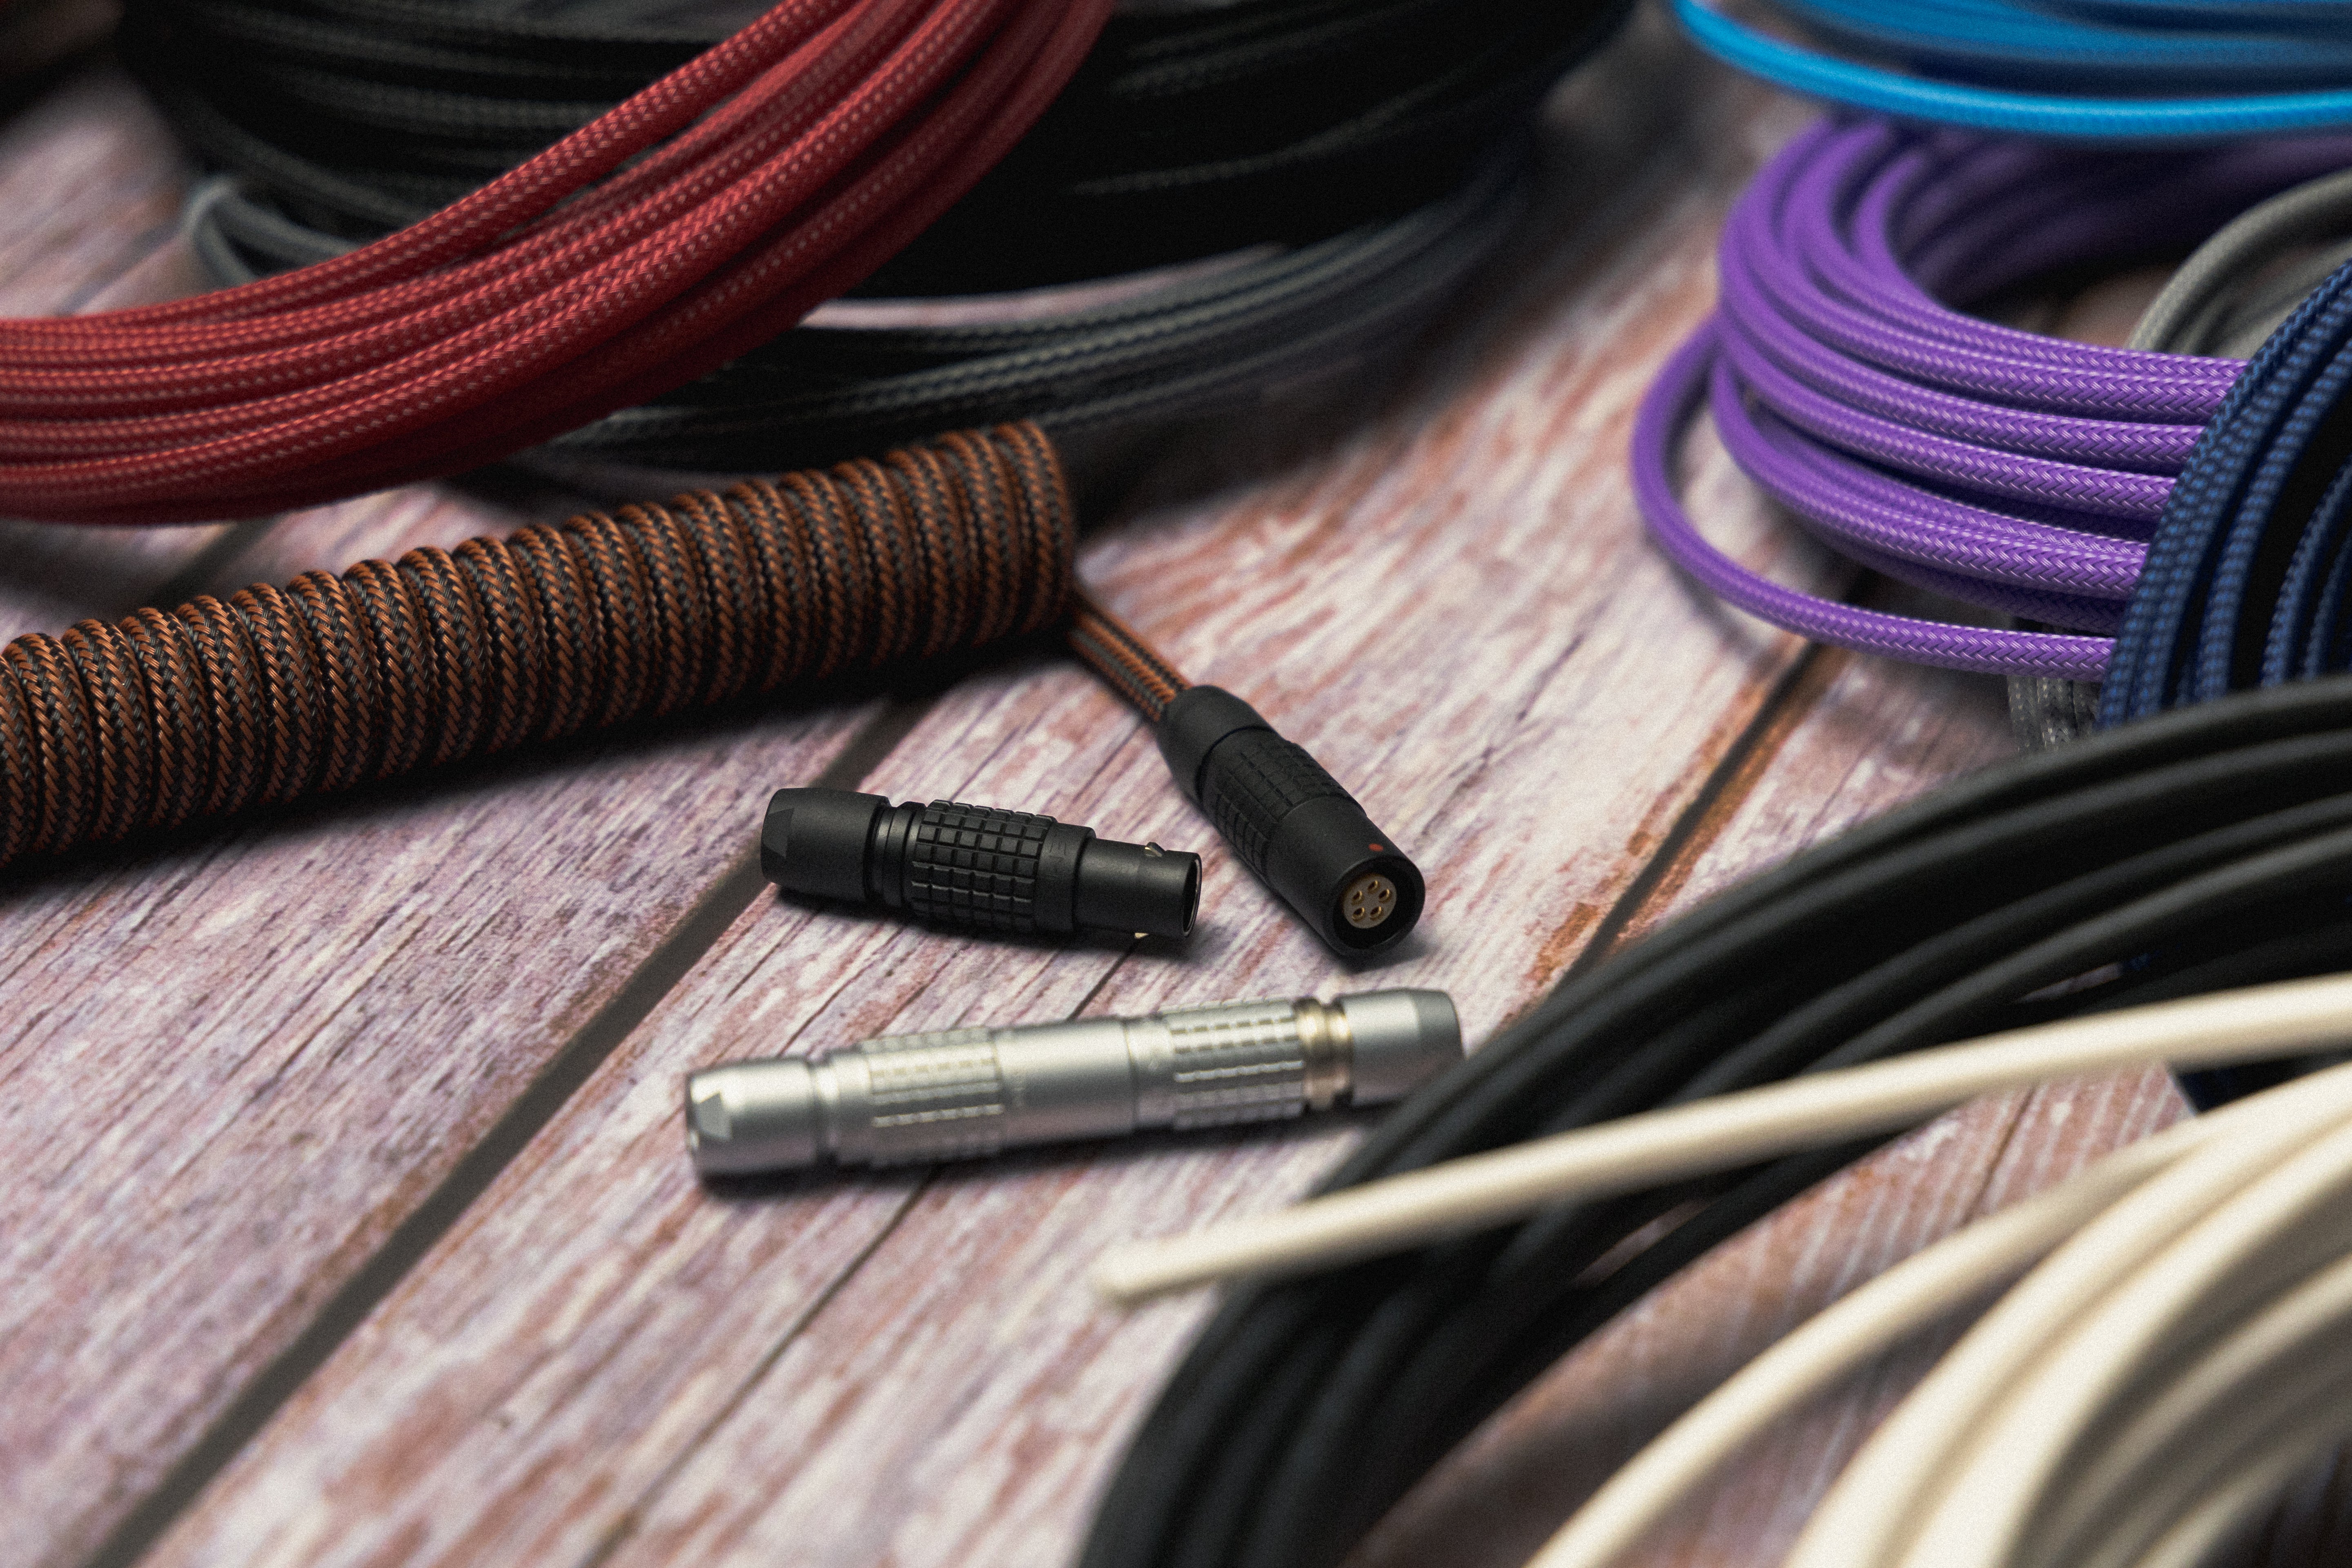 Themed Cables